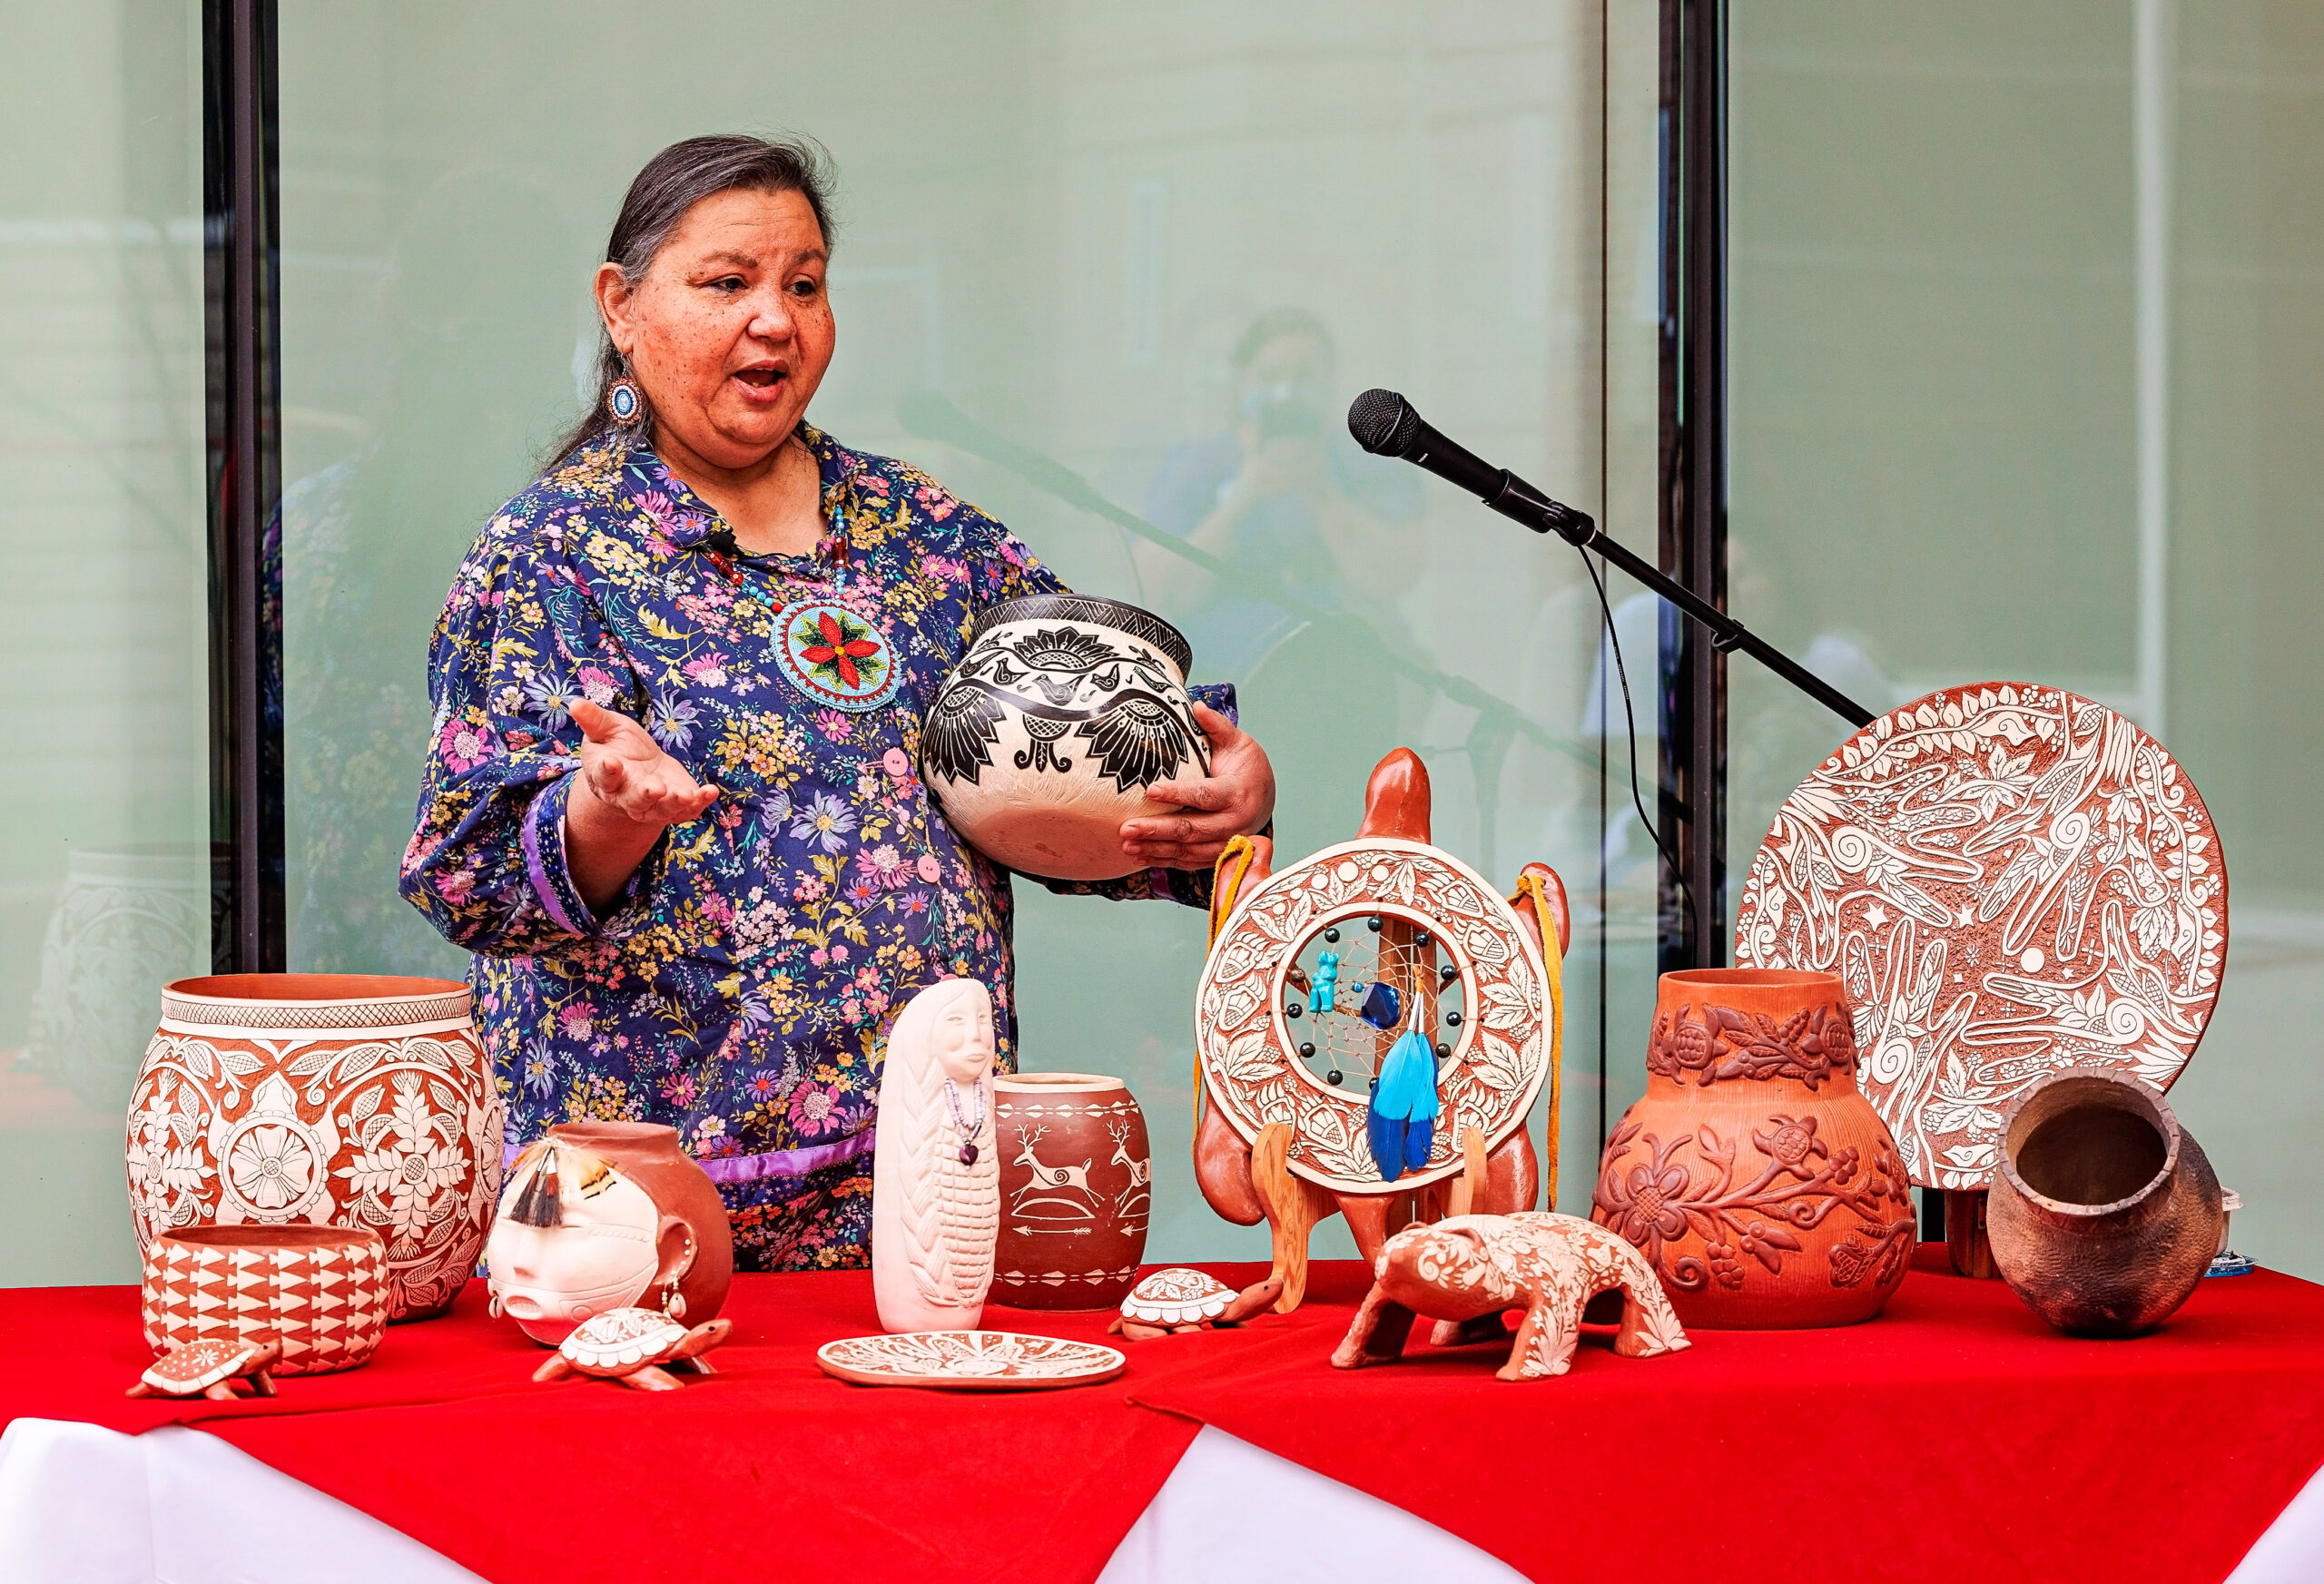 A woman of medium skin tone shows off a colorful assortment of Native pottery.